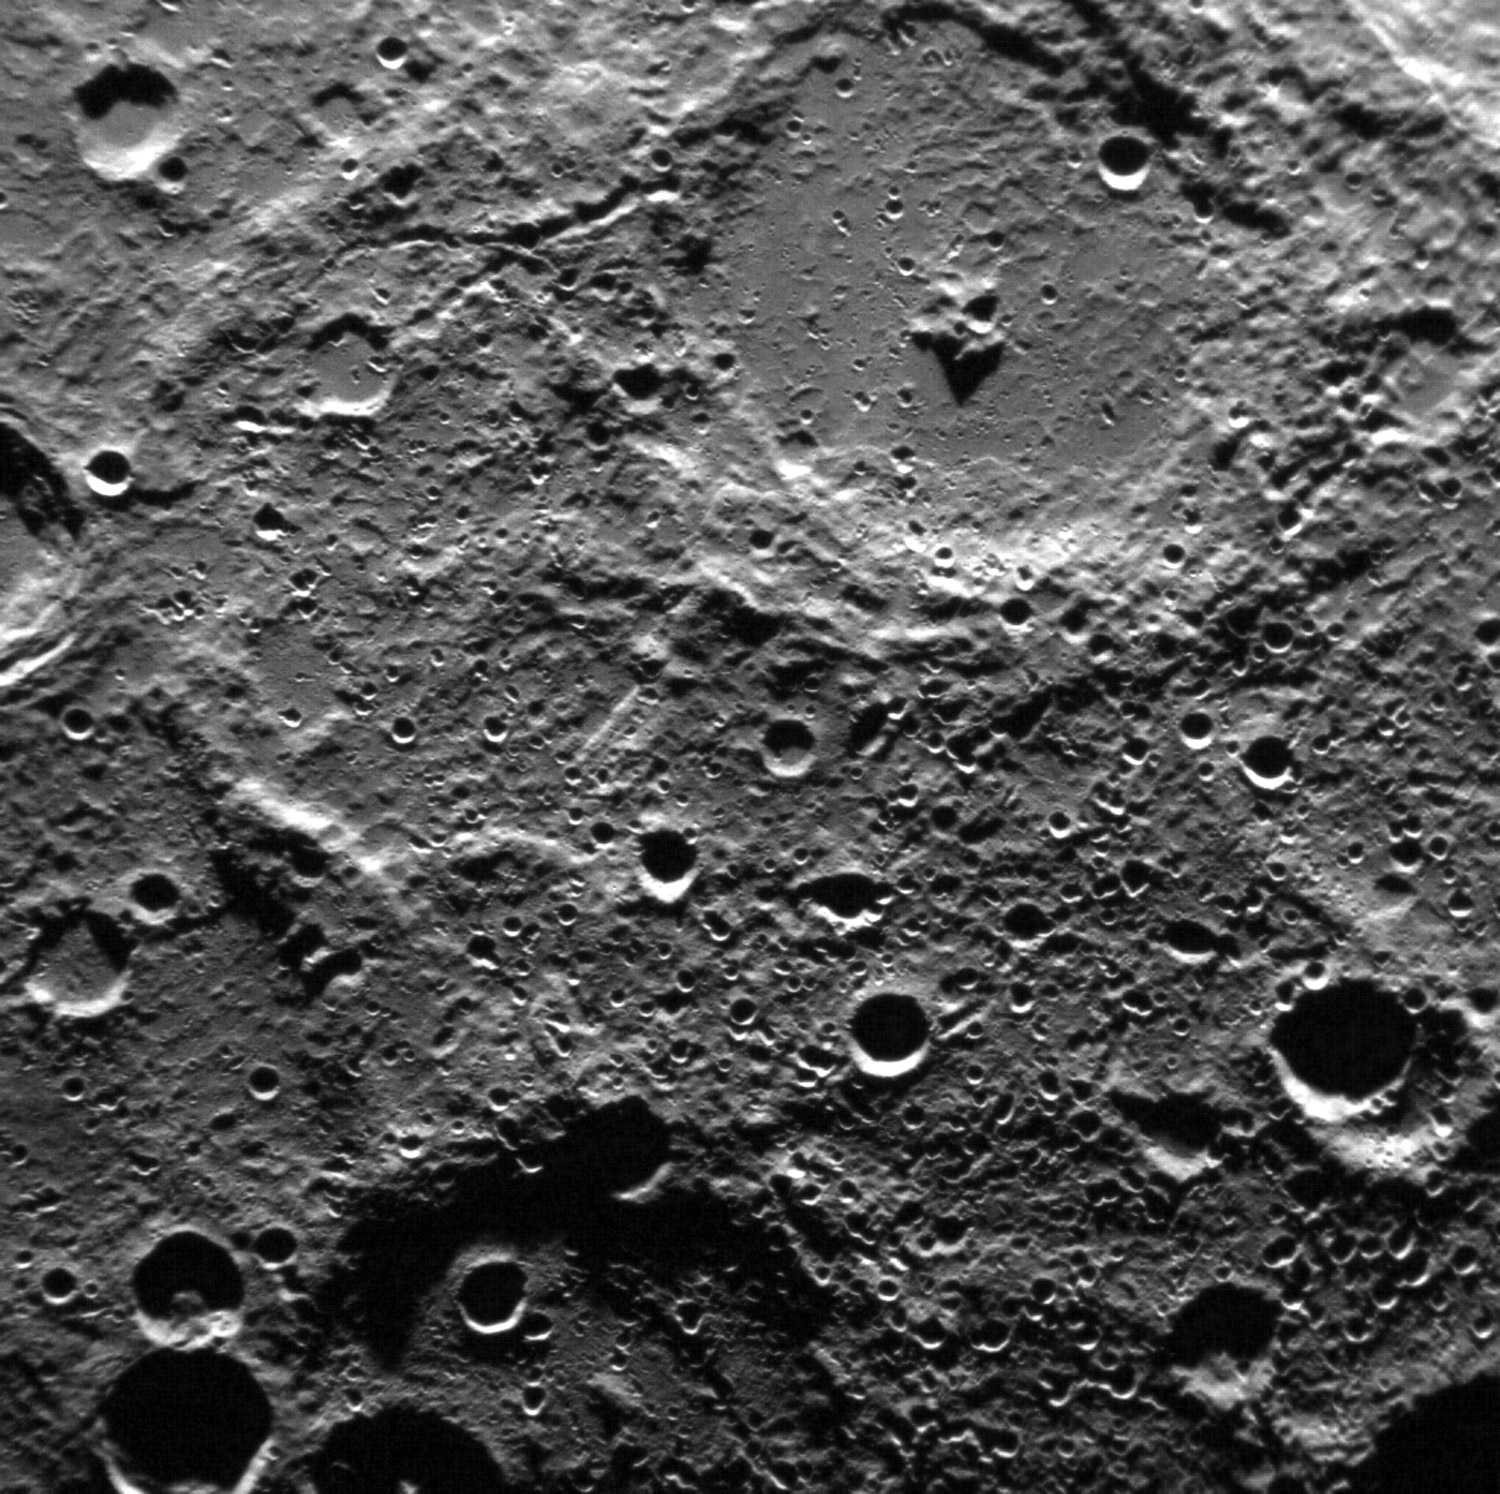 Boccaccio crater, which measures 88 mi. (142 km) across has now posed for two spacecraft. Named for 14th-century Italian poet and novelist Giovanni Boccaccio, the crater was first photographed by Mariner 10, when it conducted a non-orbital flyby in 1974. Like many craters on Earth’s moon, Boccacio has a prominent central peak, which was formed by uplift from beneath the surface at the point of impact.